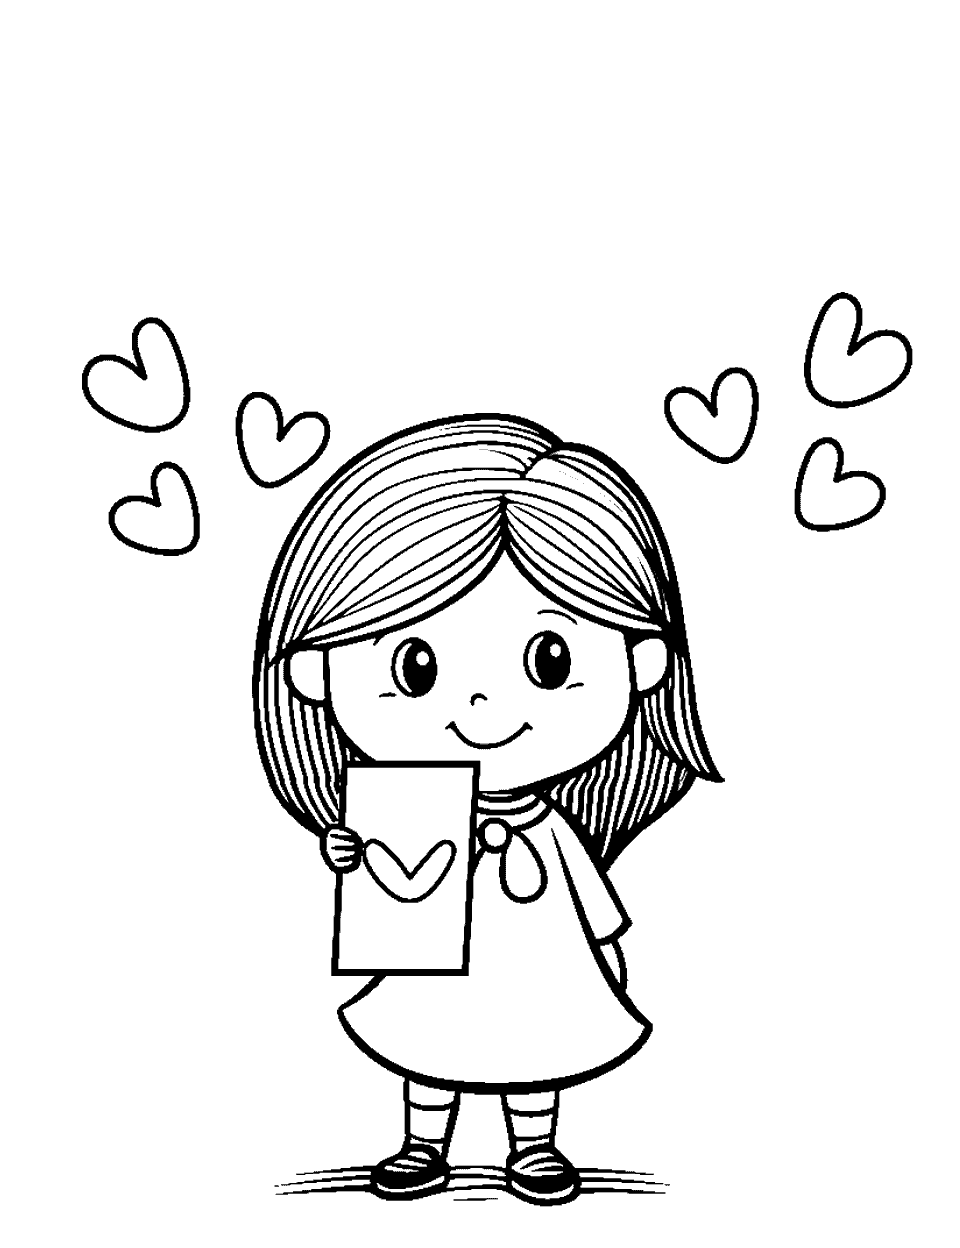 Girl with a Valentine Card Coloring Page - A young girl holding a large Valentine’s Day card with a smile.